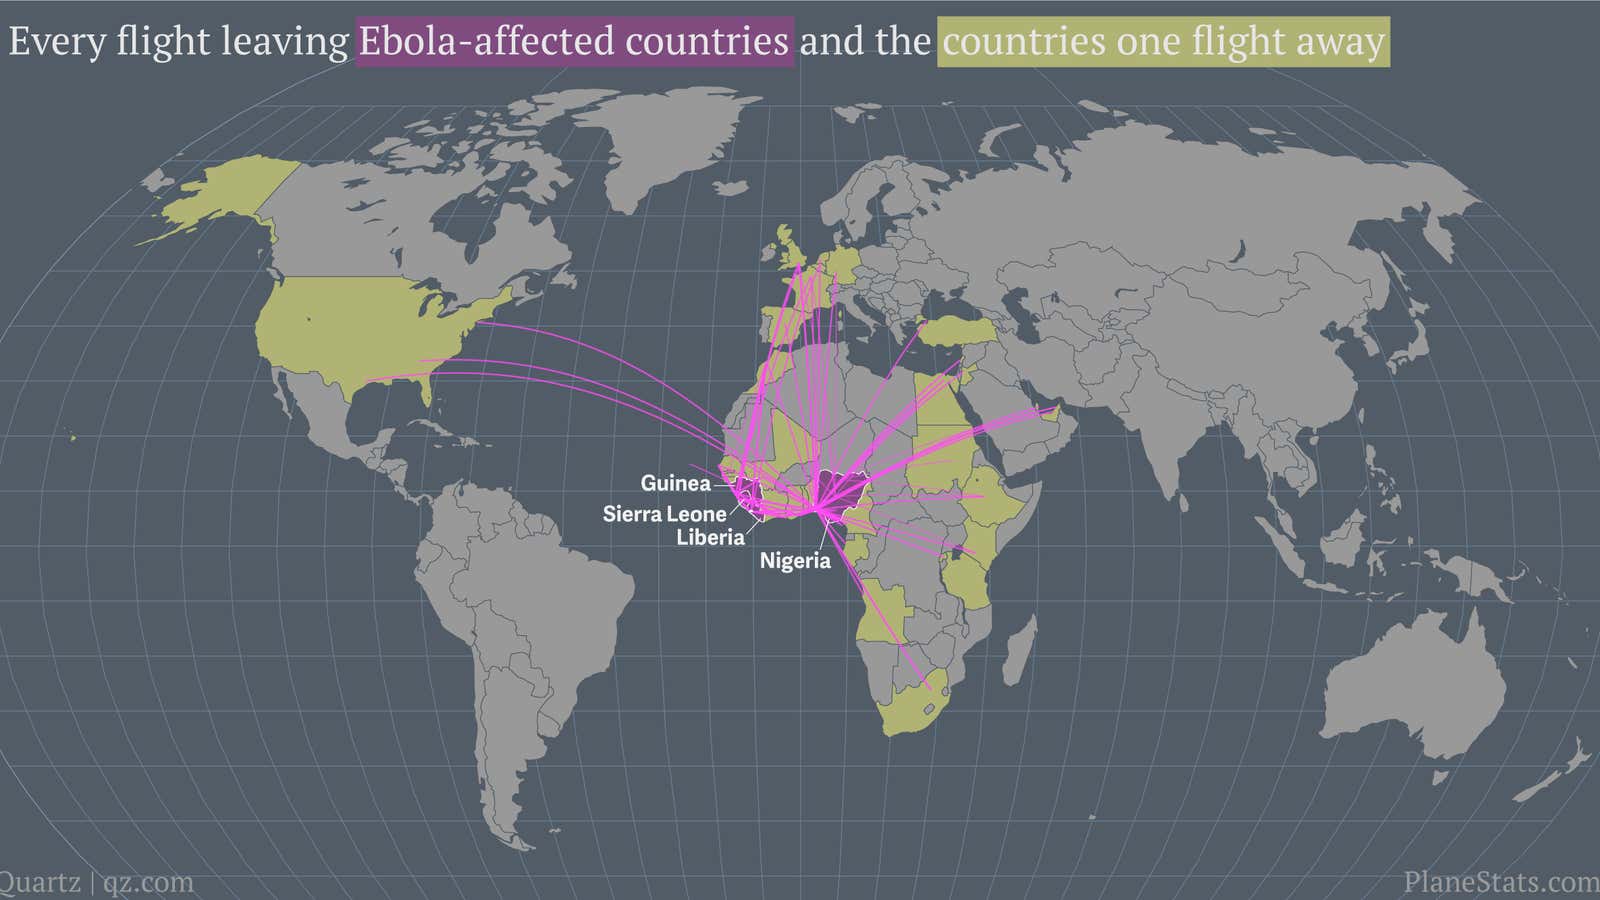 Here are the 35 countries one flight away from Ebola-affected countries